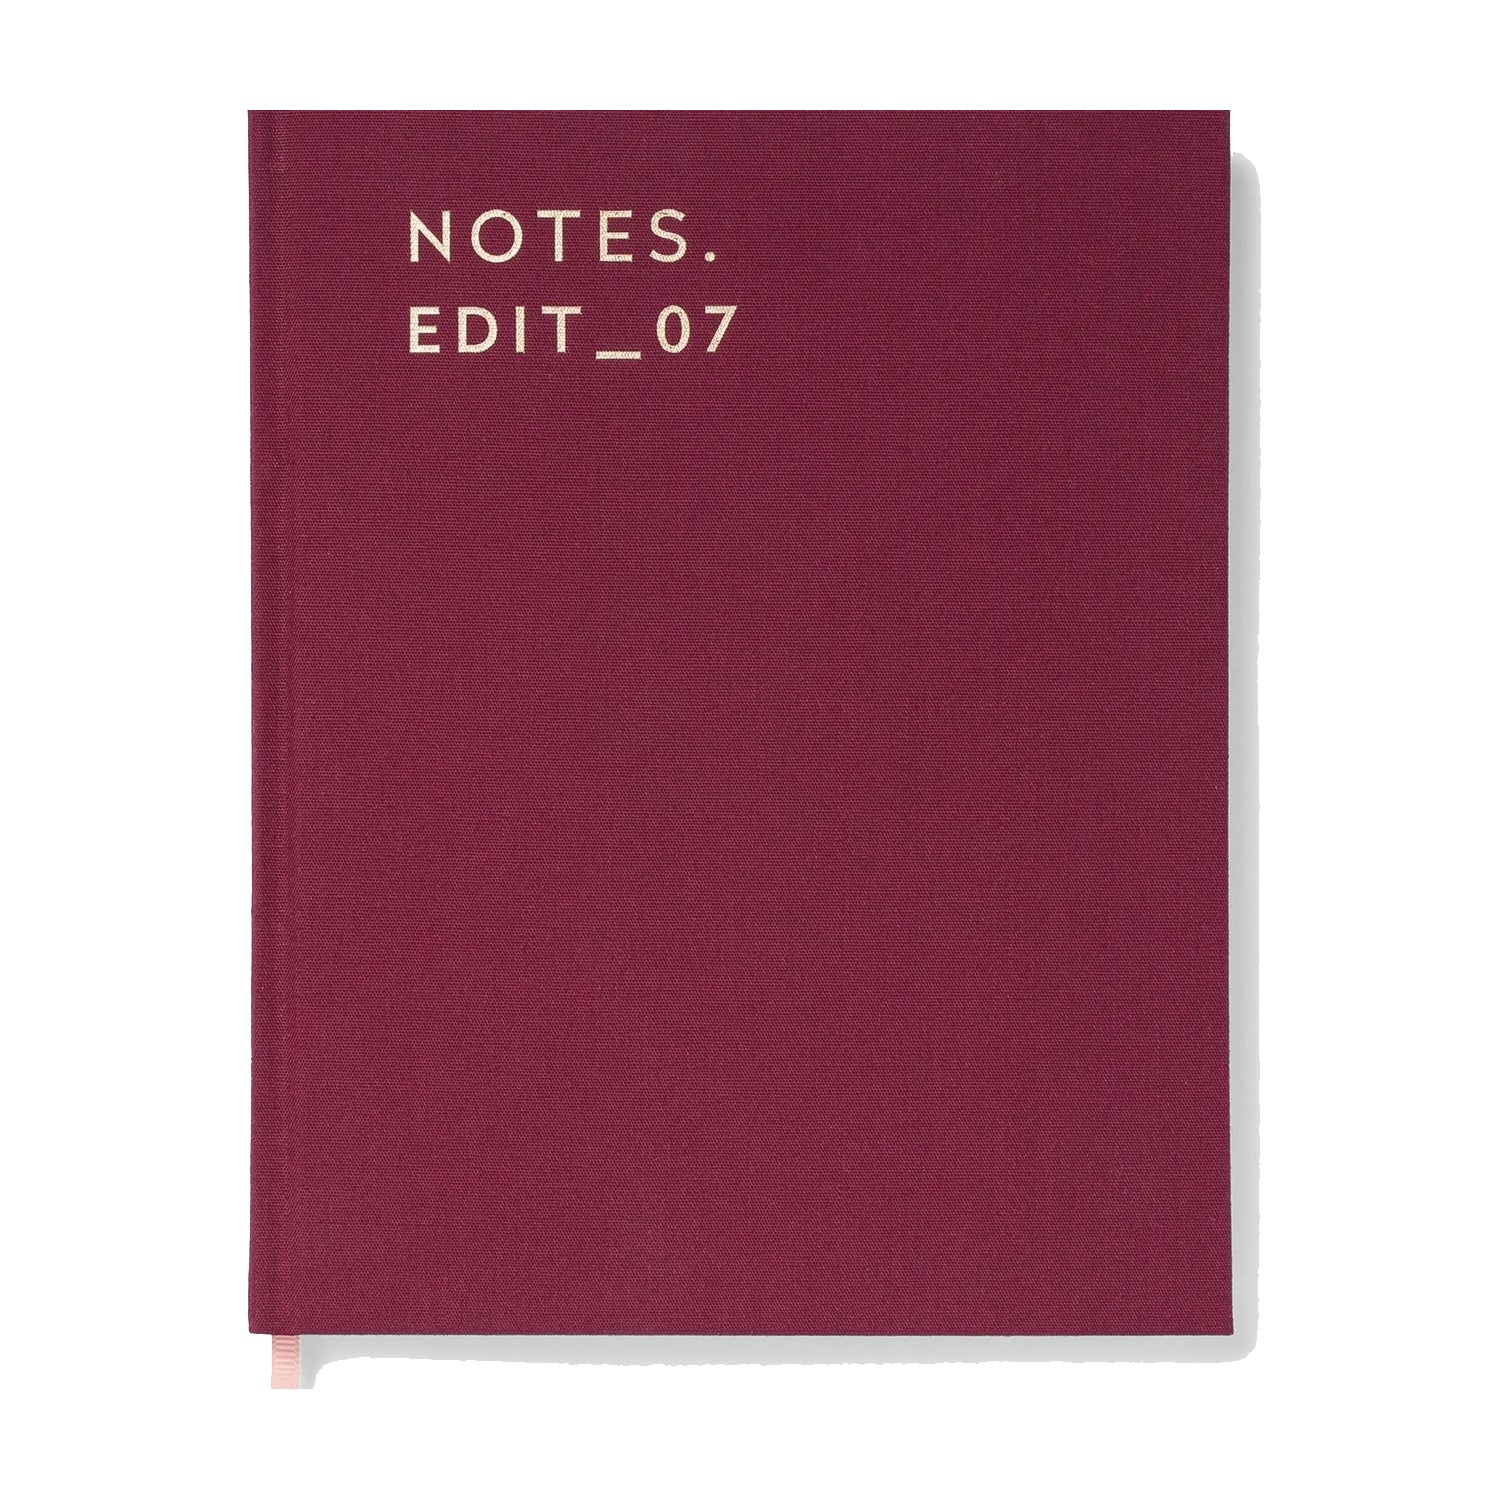 Burgundy Journal - Lined Pages